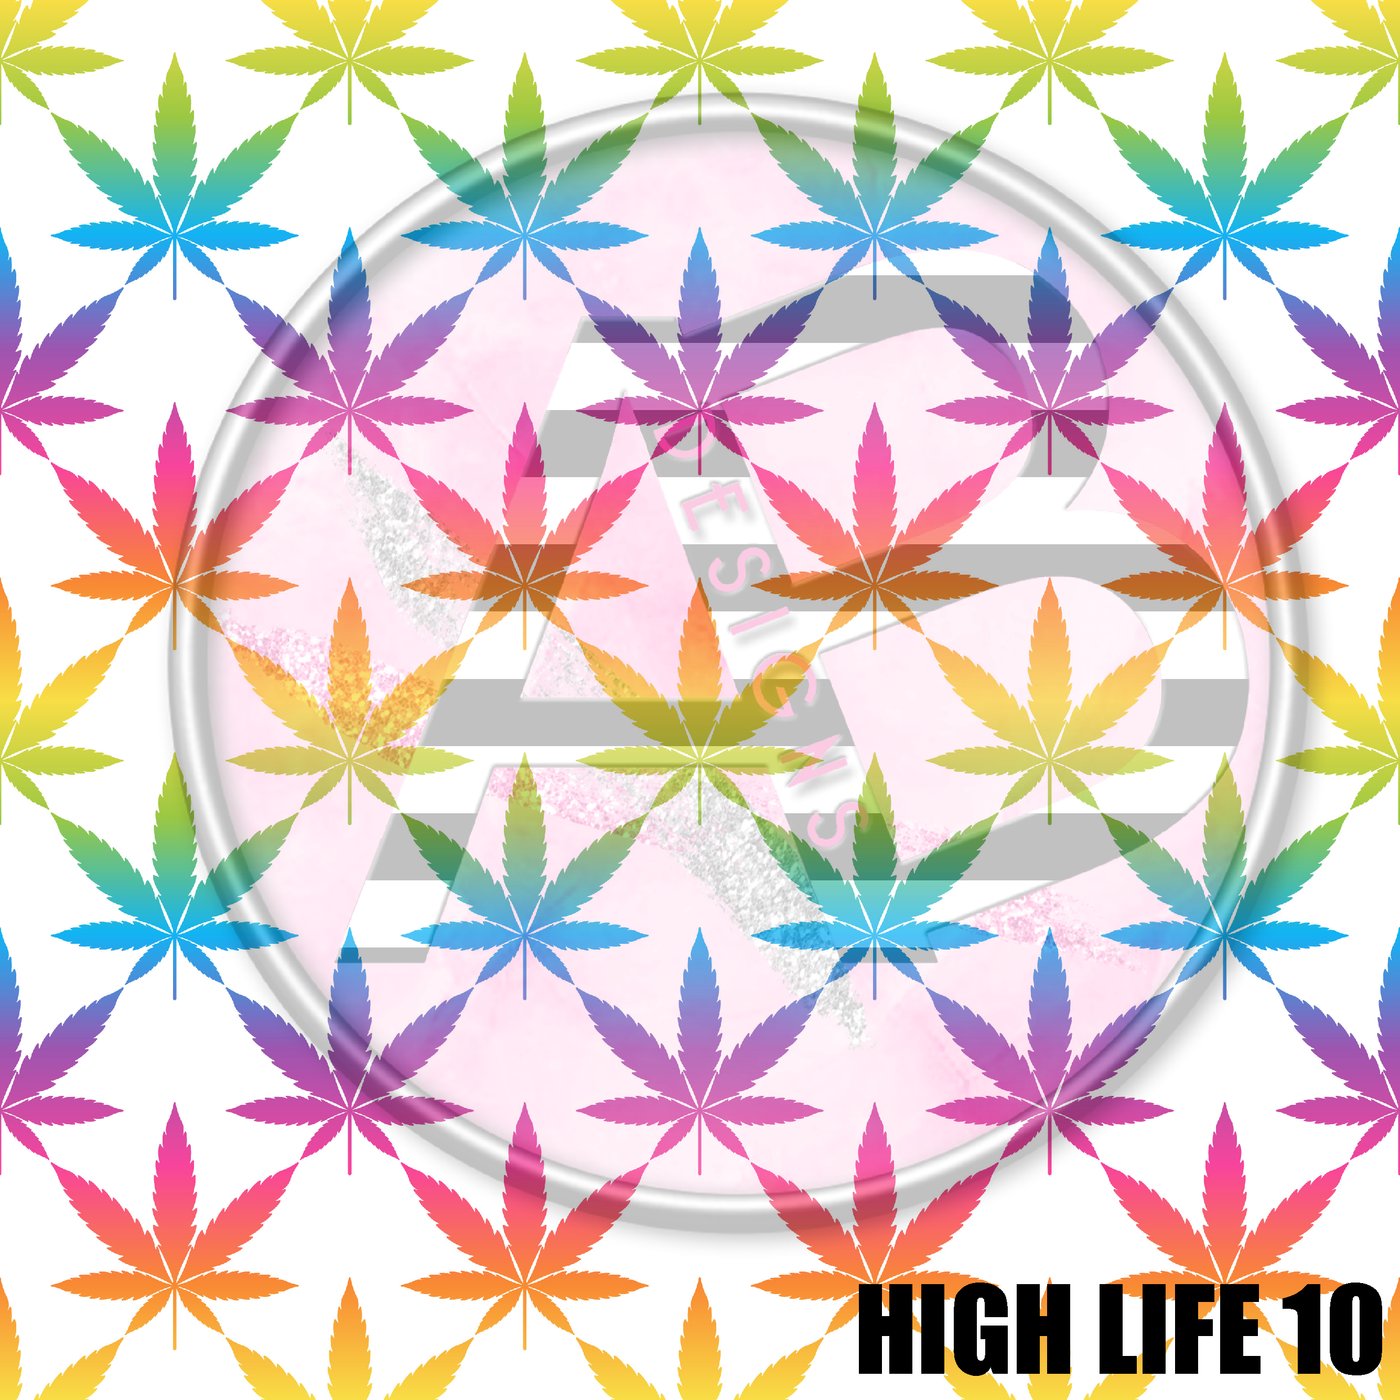 Adhesive Patterned Vinyl - High Life 10